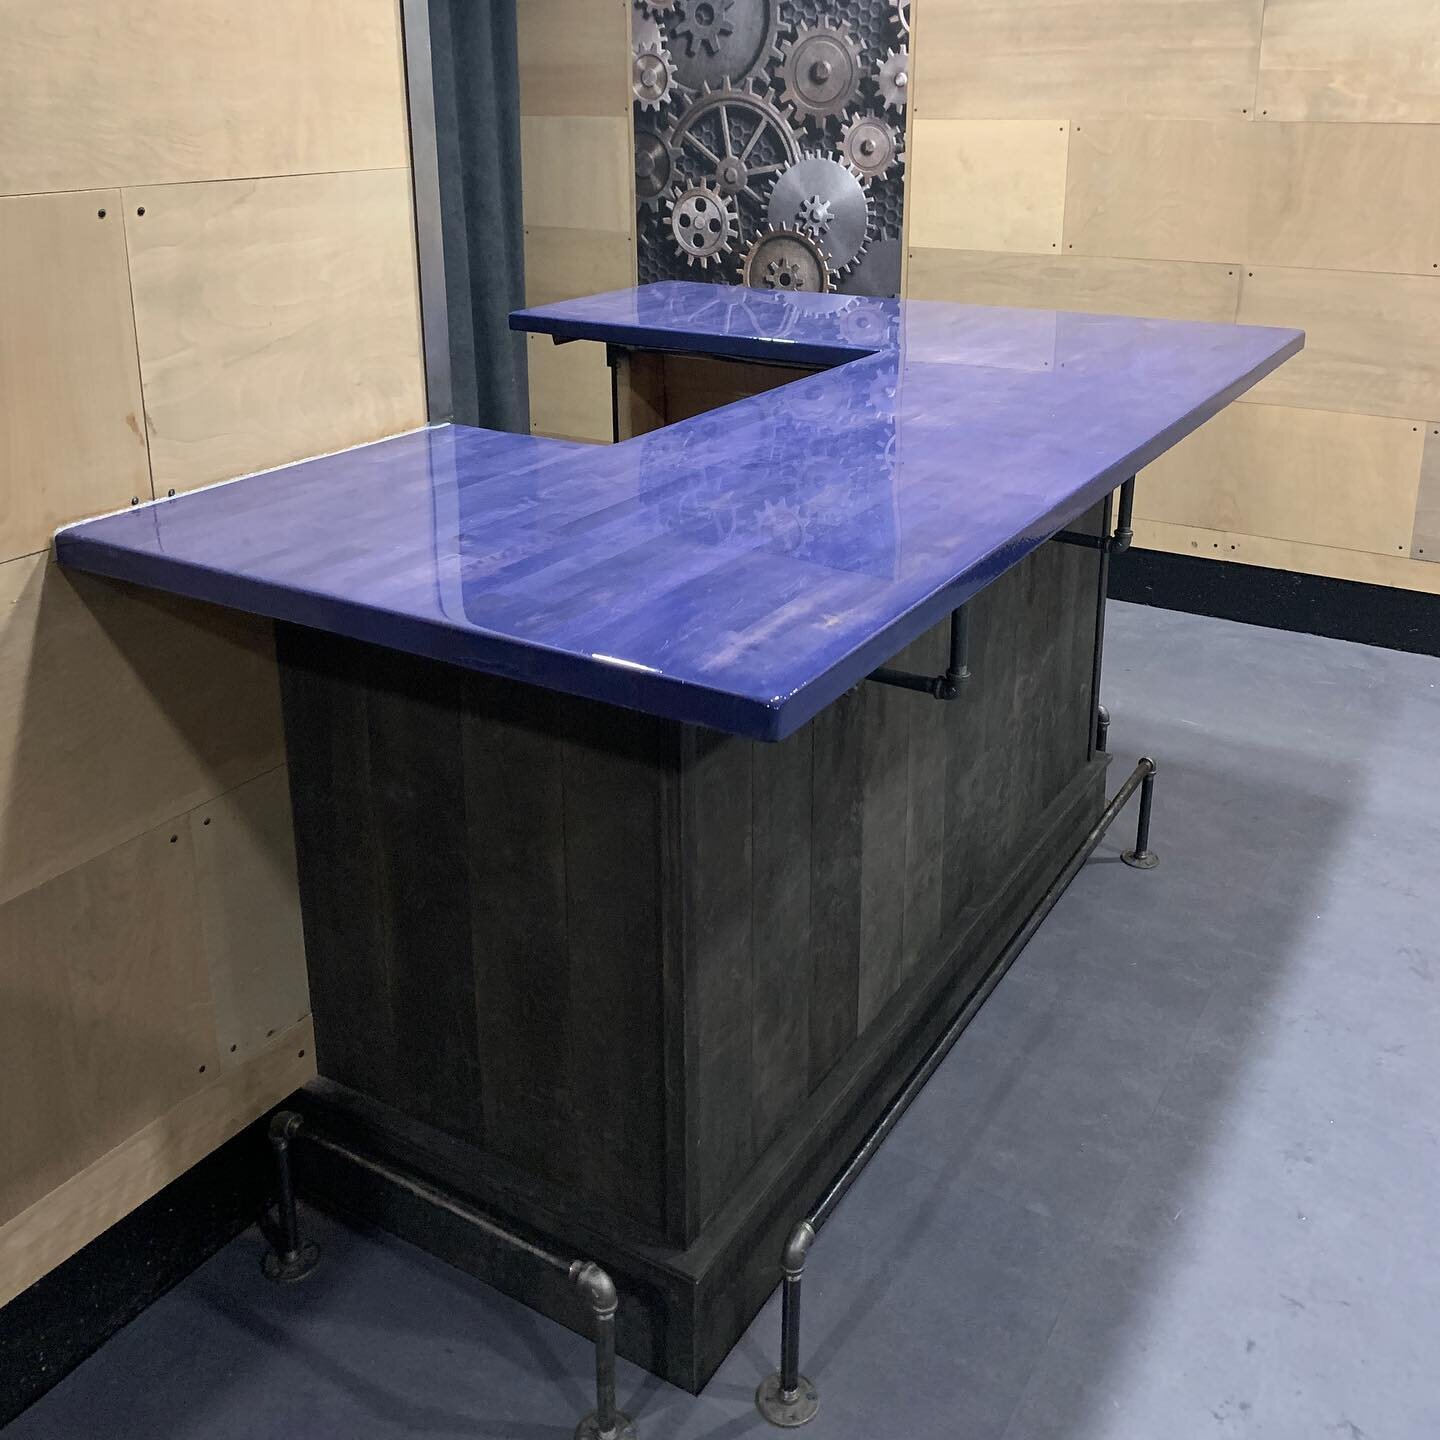 This is one awesome bar! We recently refinished it by stripping it back to the original  butcher block countertop, staining it with Varathane tintable wood stain and then coating the entire thing with MAS Table Top Pro Epoxy. Swipe to see the progres